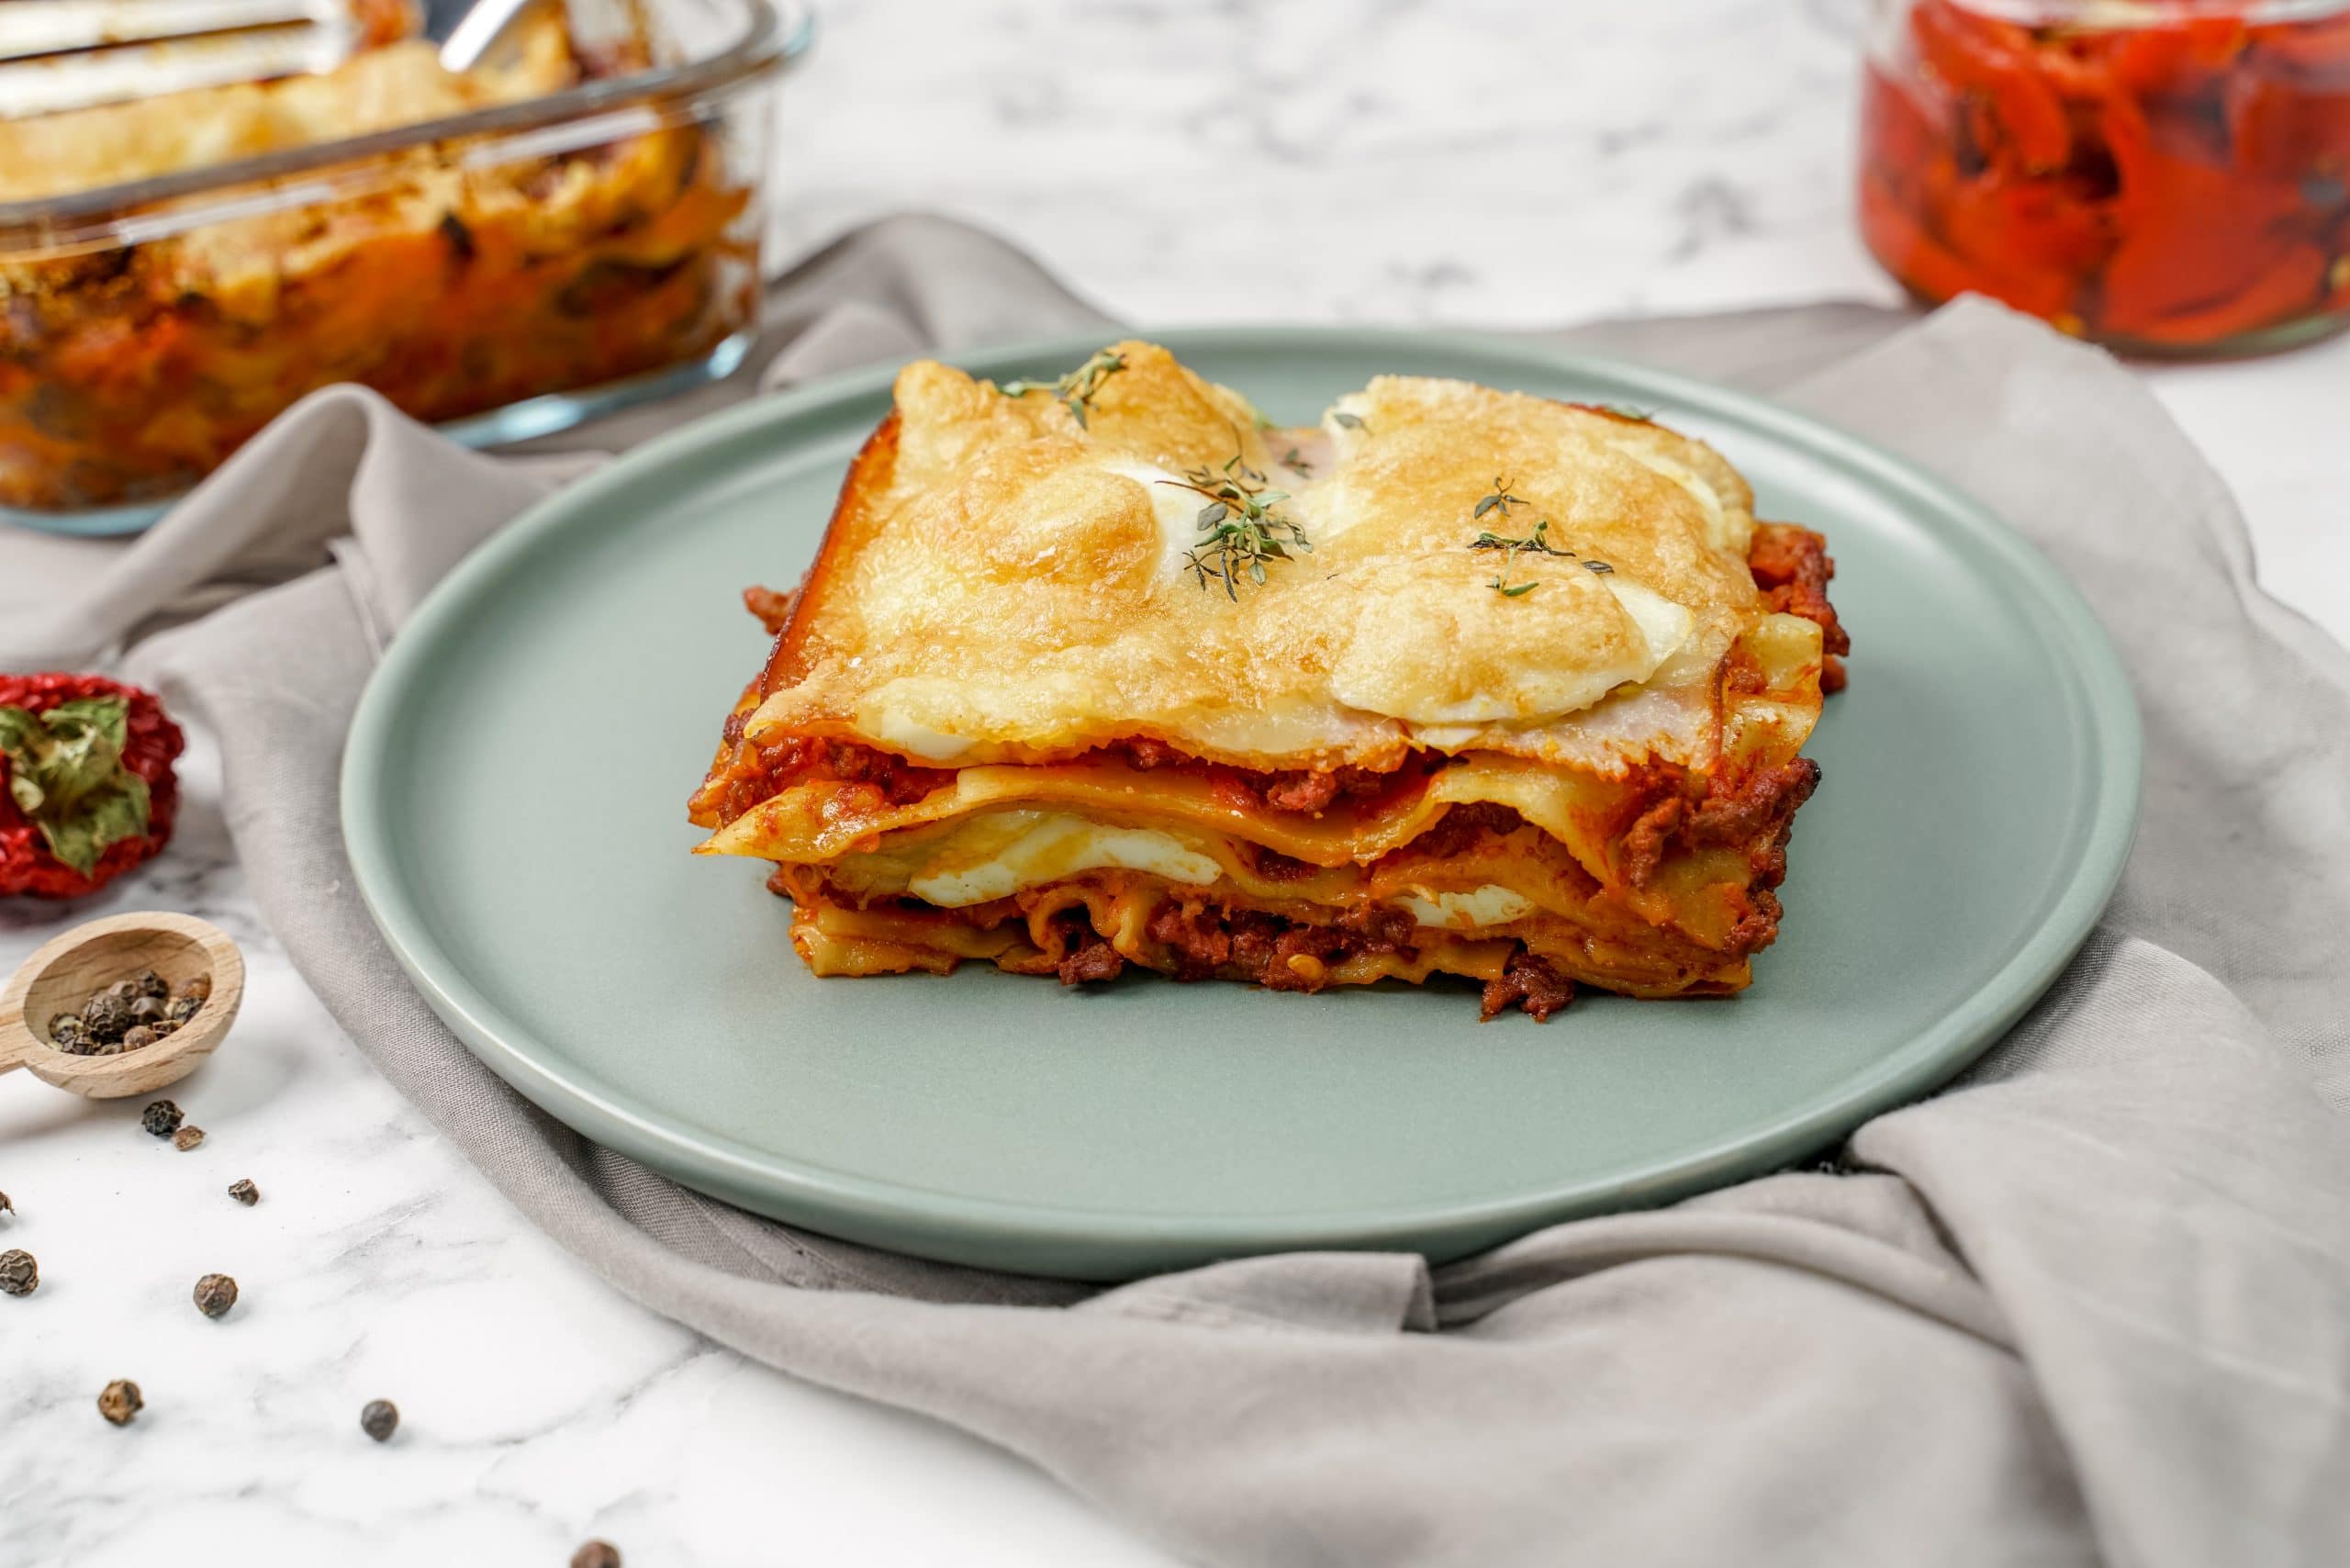 Simple Spicy Calabrian Chili Meat Lasagna